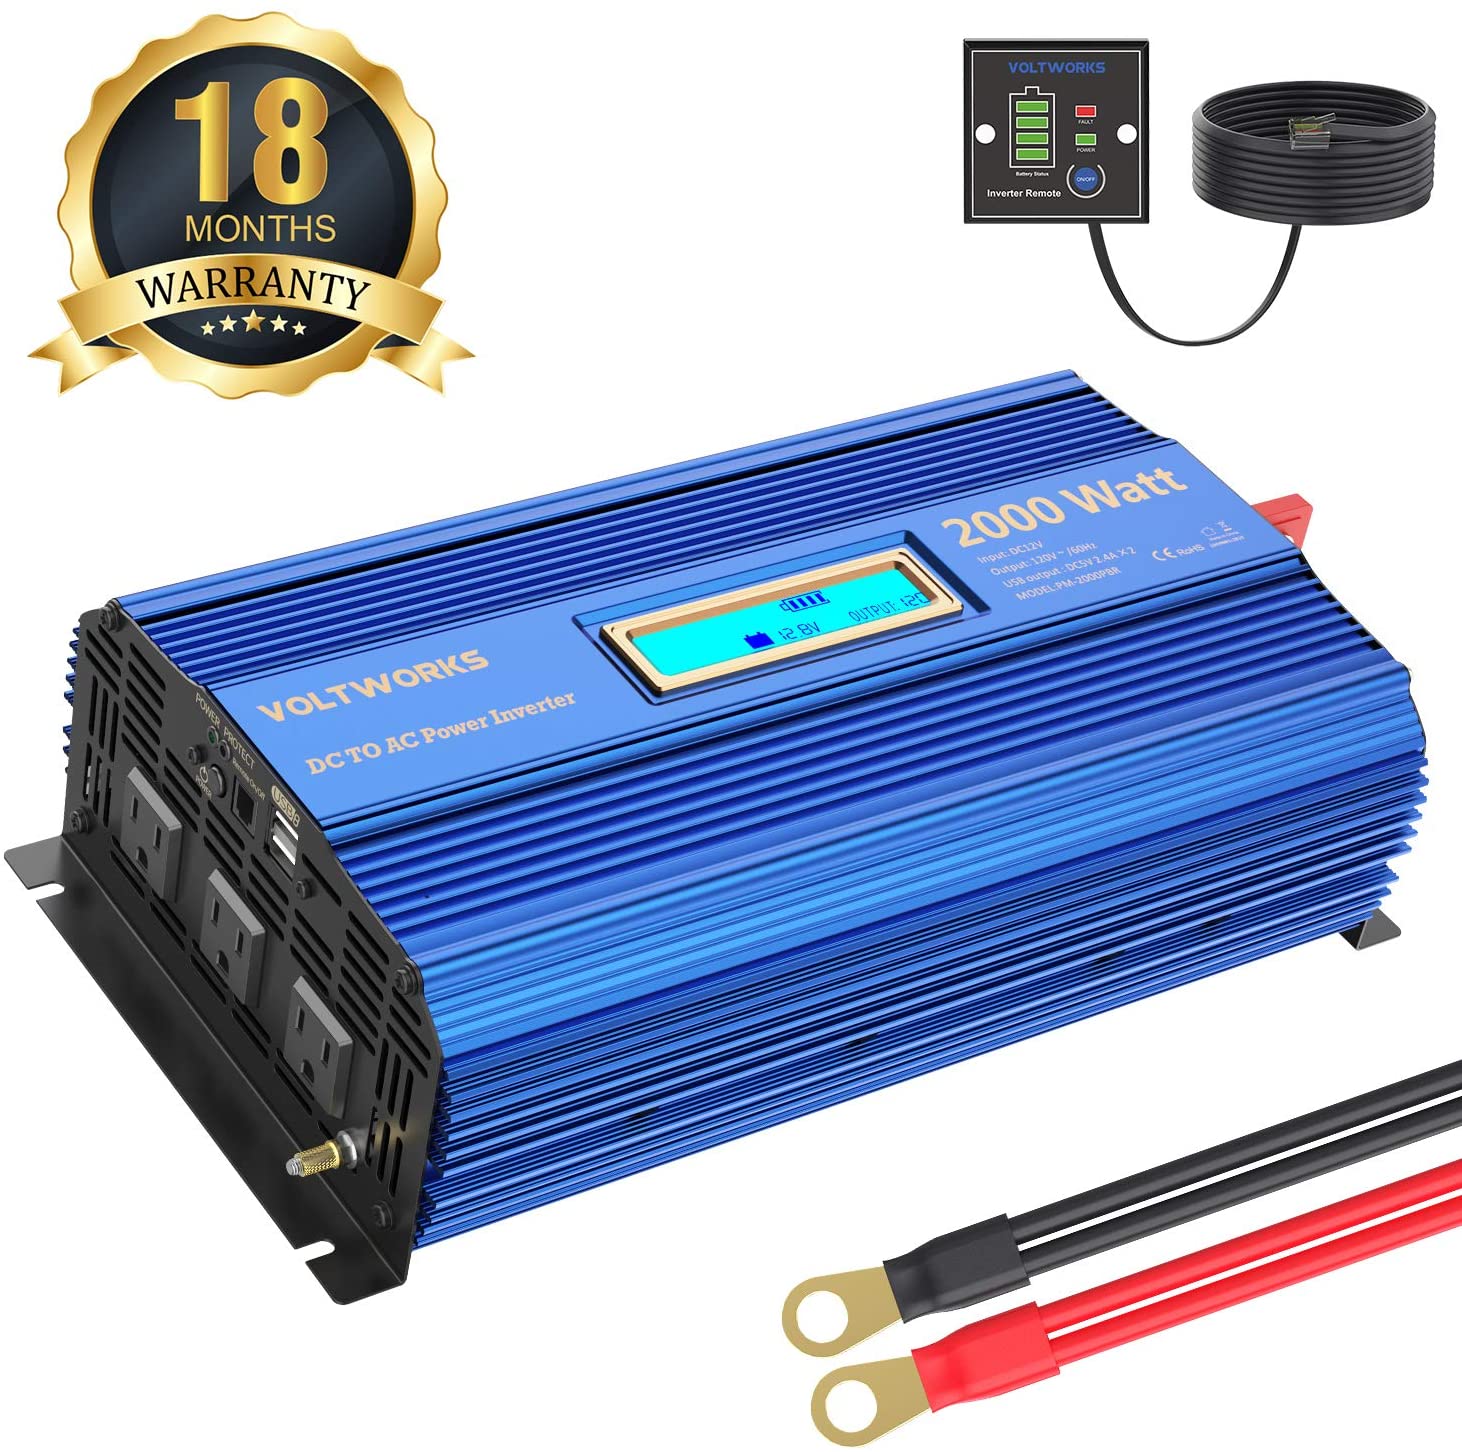 Power Inverter 2000w DC 12V to AC 120V Modified Sine Wave Inverter with 3AC Outlets Dual 2.4A USB Ports Remote